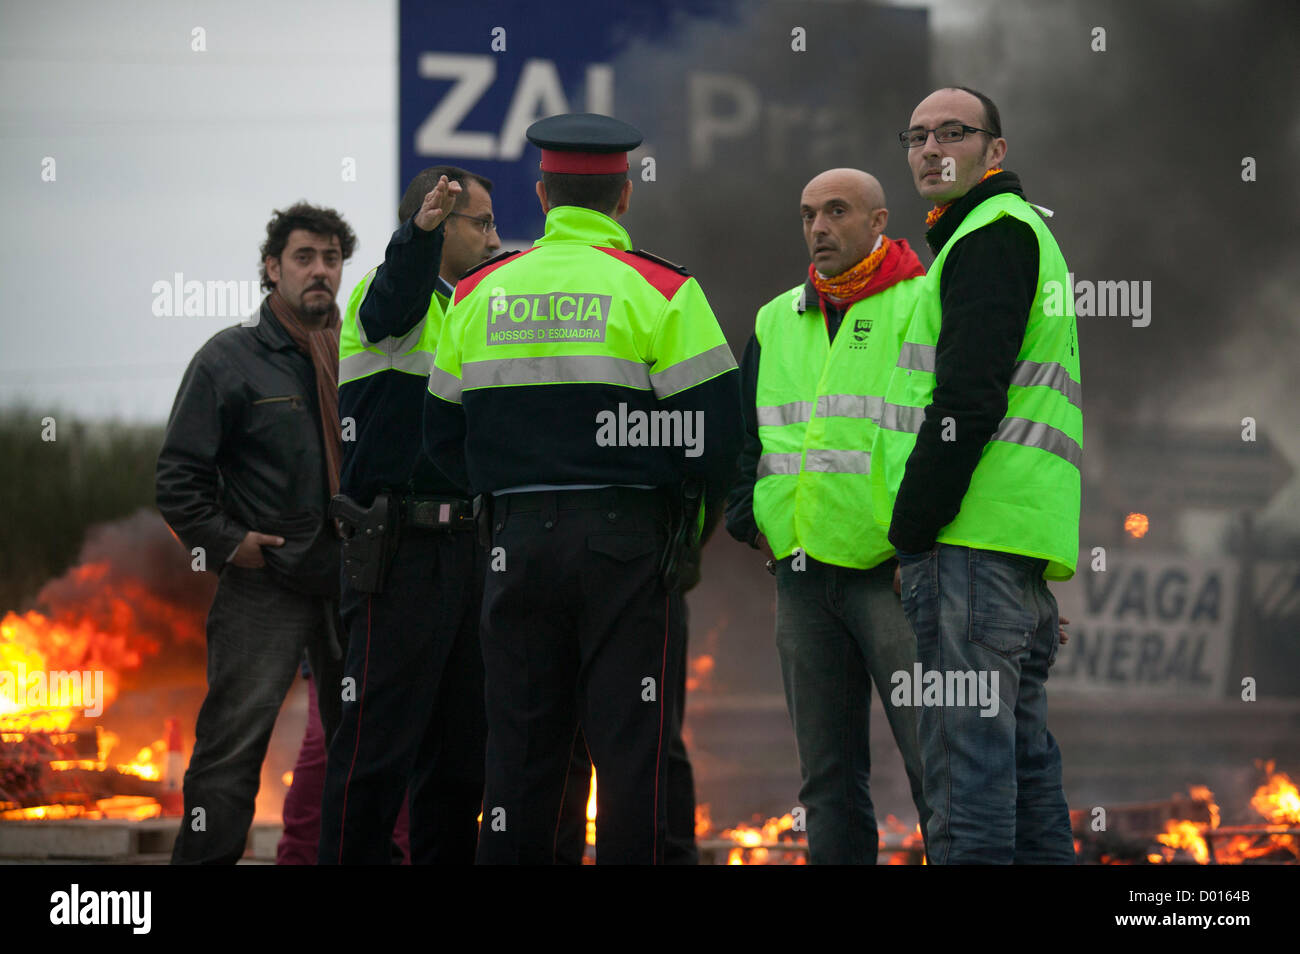 14th November 2012. Barricades of picketers block key industrial and logistical areas in Barcelona, Spain. Today general strikes against austerity measures are planned in Spain and Portugal and walkouts in Greece and Italy, grounding flights, closing schools and shutting down transport.   Stock Photo